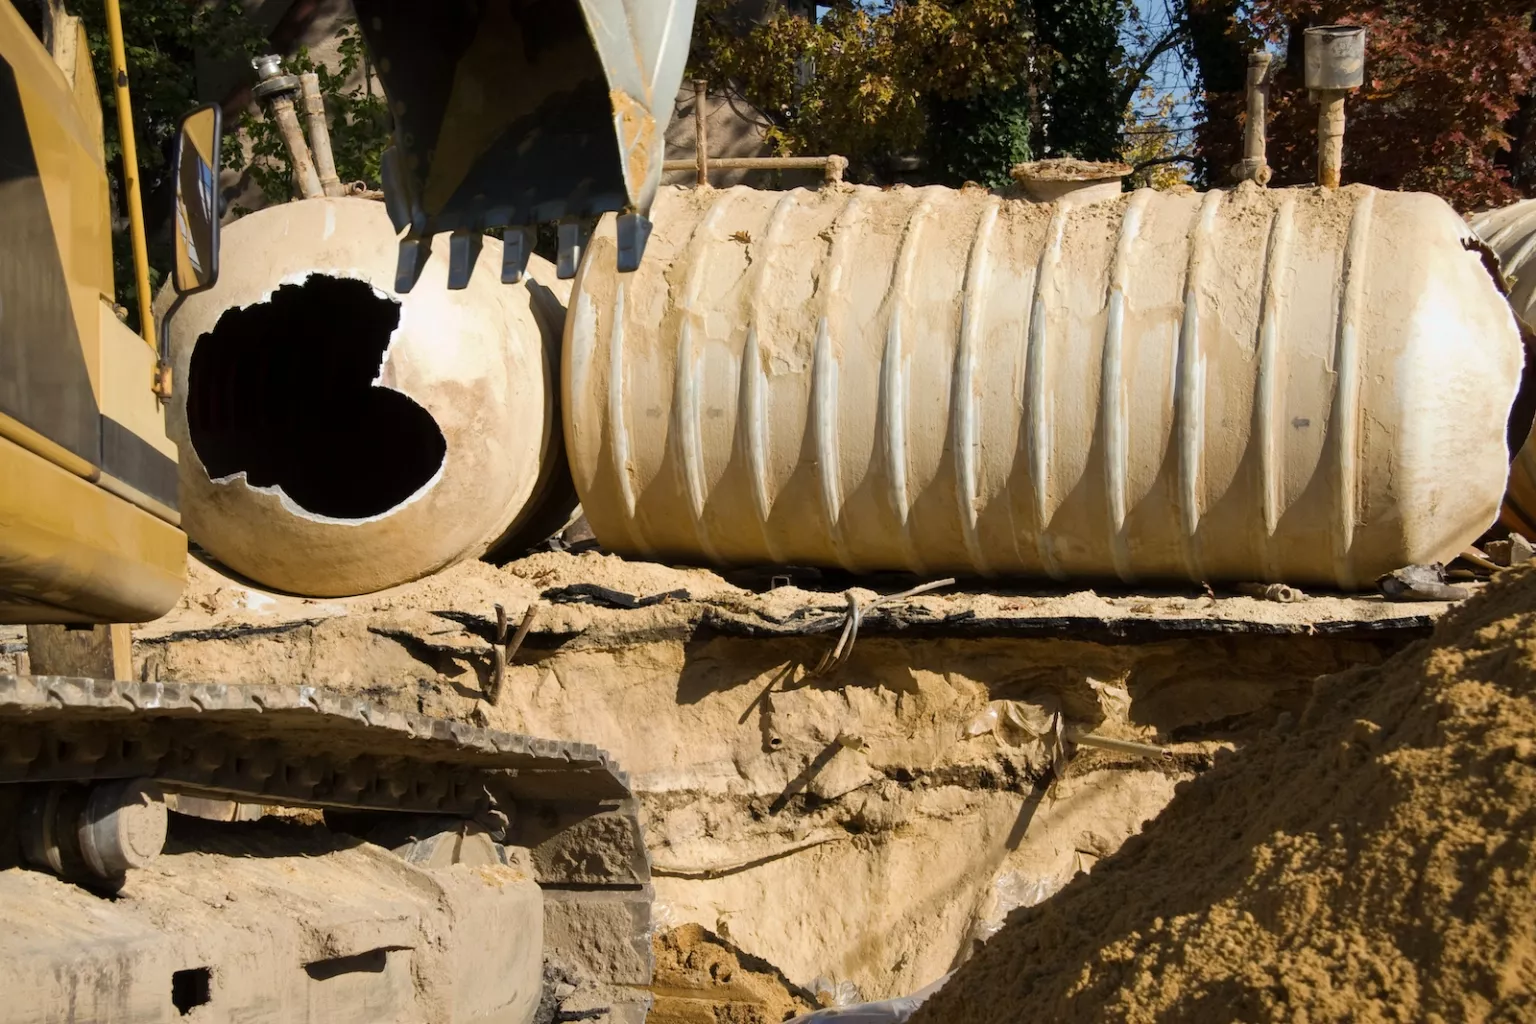 The claw of a backhoe digs out a large oblong structure from the ground.